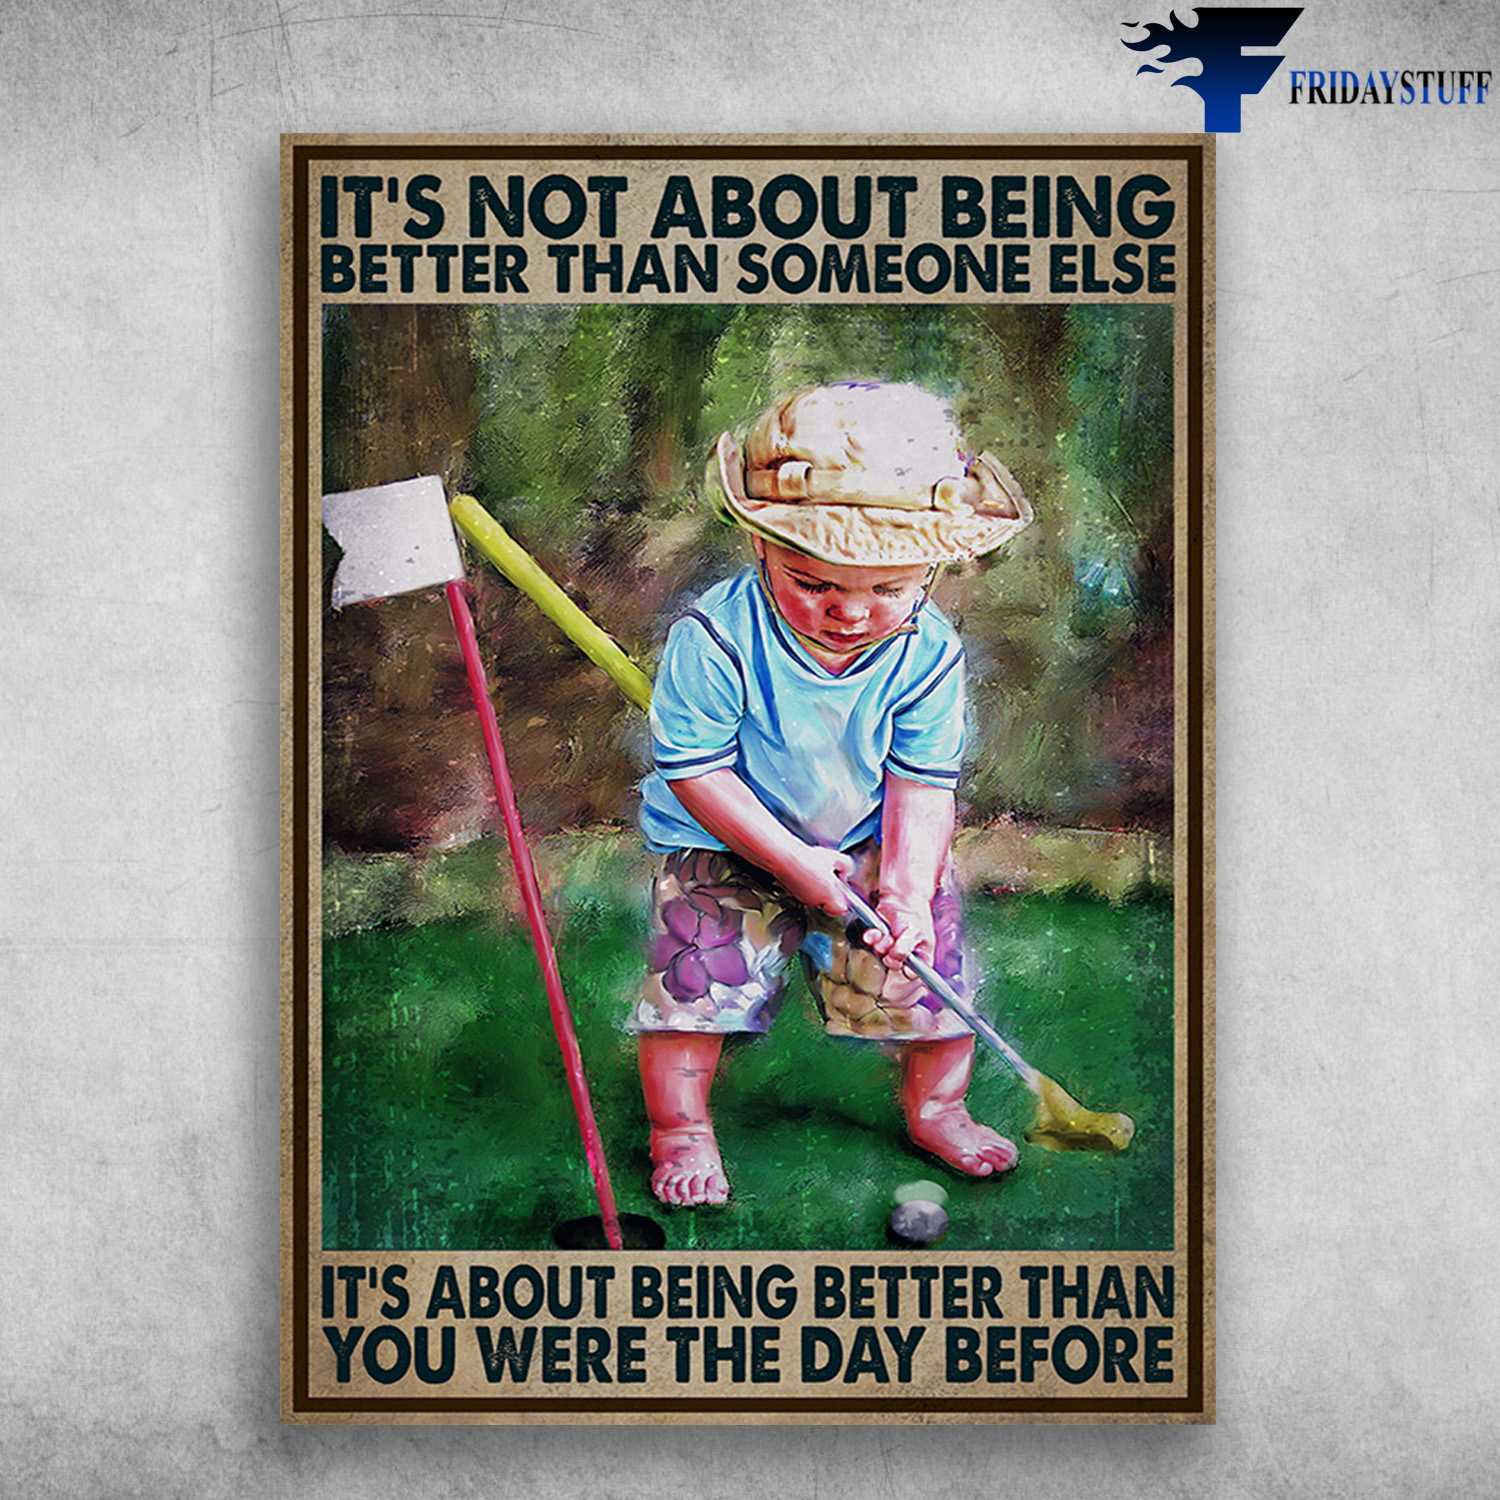 Baby Golf - It's Not About Being Better Than Someone Else, It's About Being Better Than You Were The Day Before